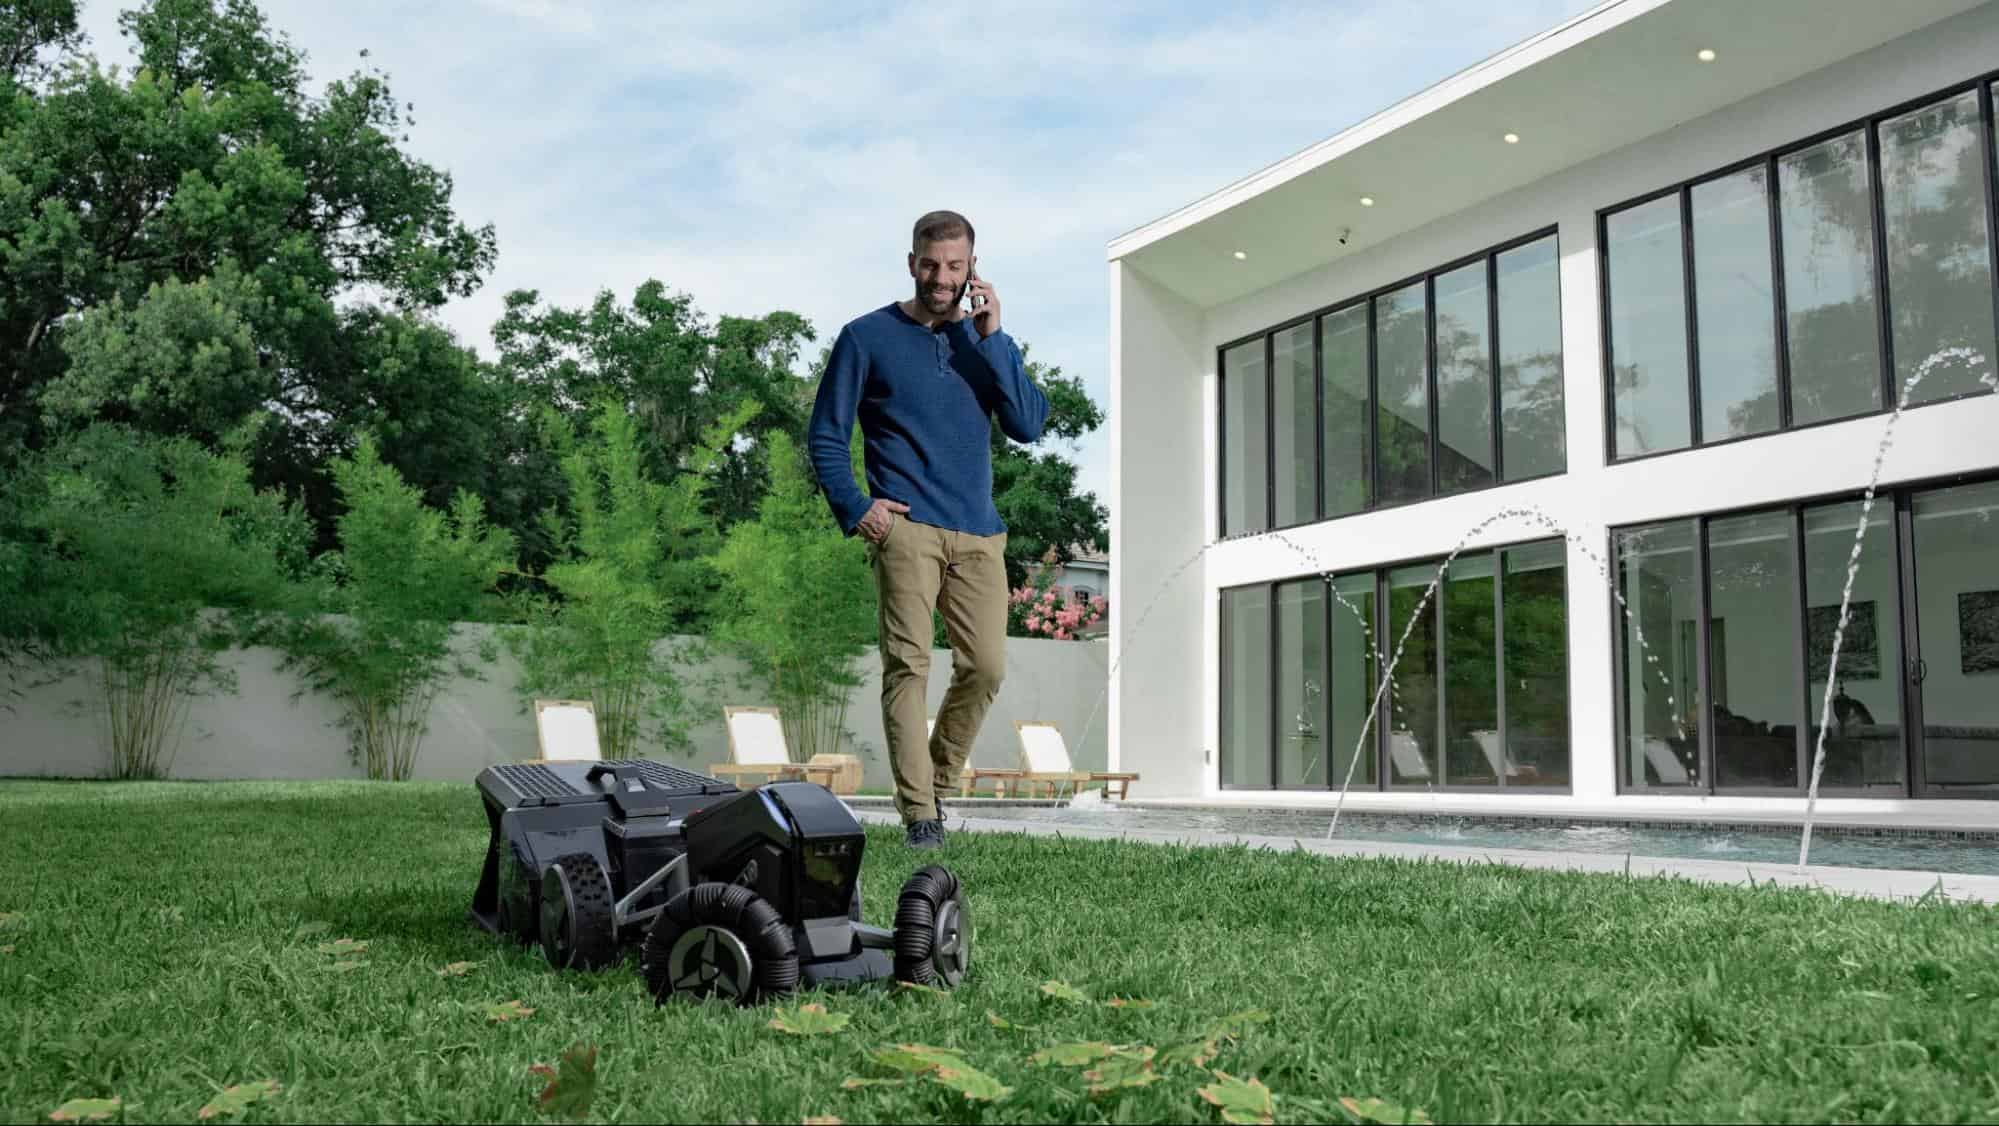 Do All Robot Lawn Mowers Need a Perimeter Wire?